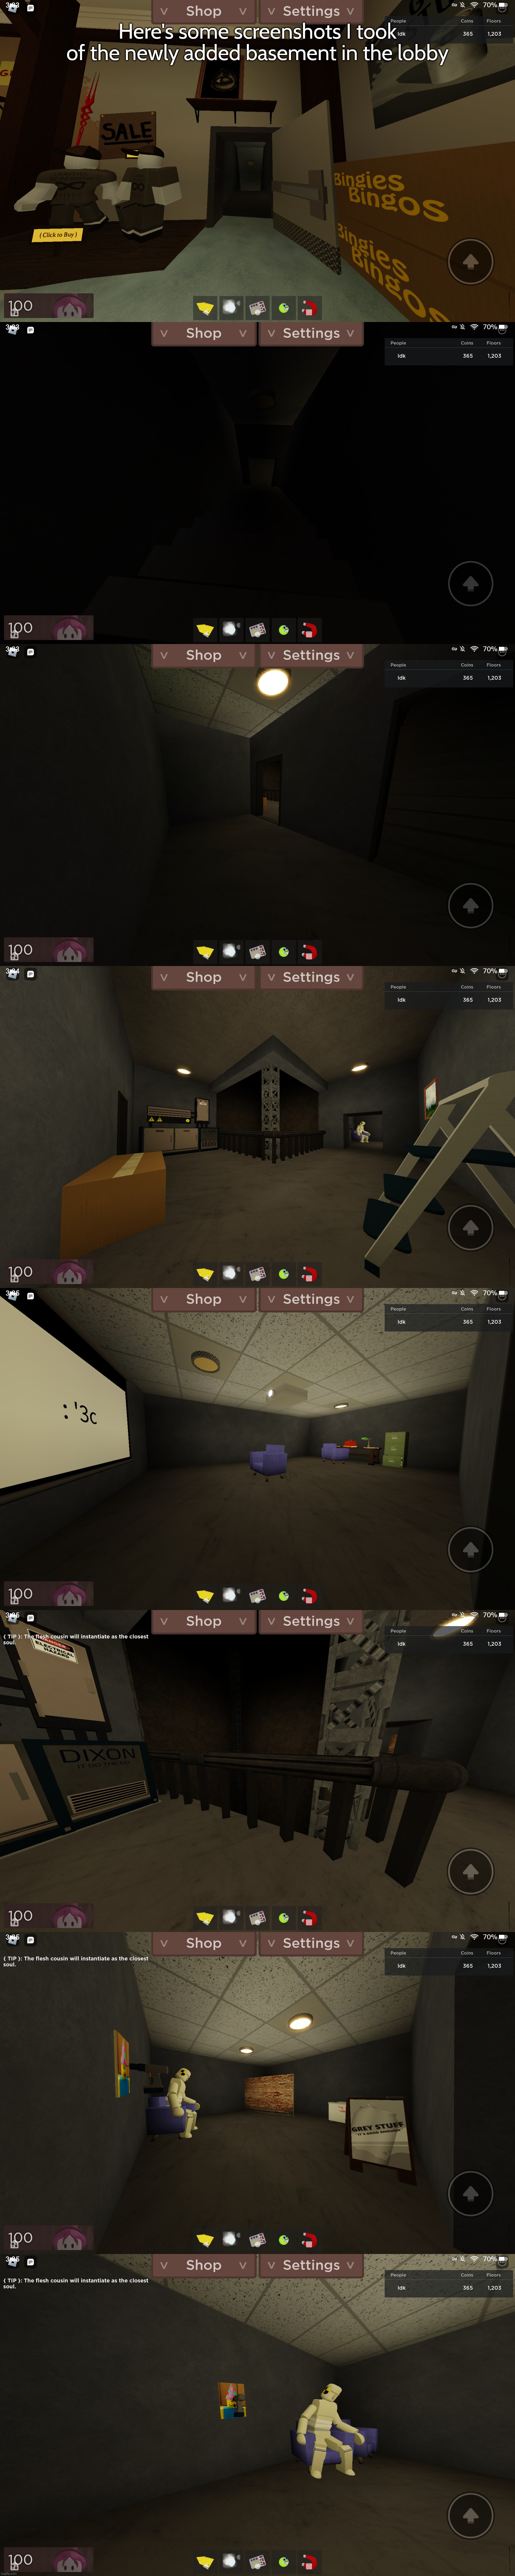 Here's some screenshots I took of the newly added basement in the lobby | made w/ Imgflip meme maker